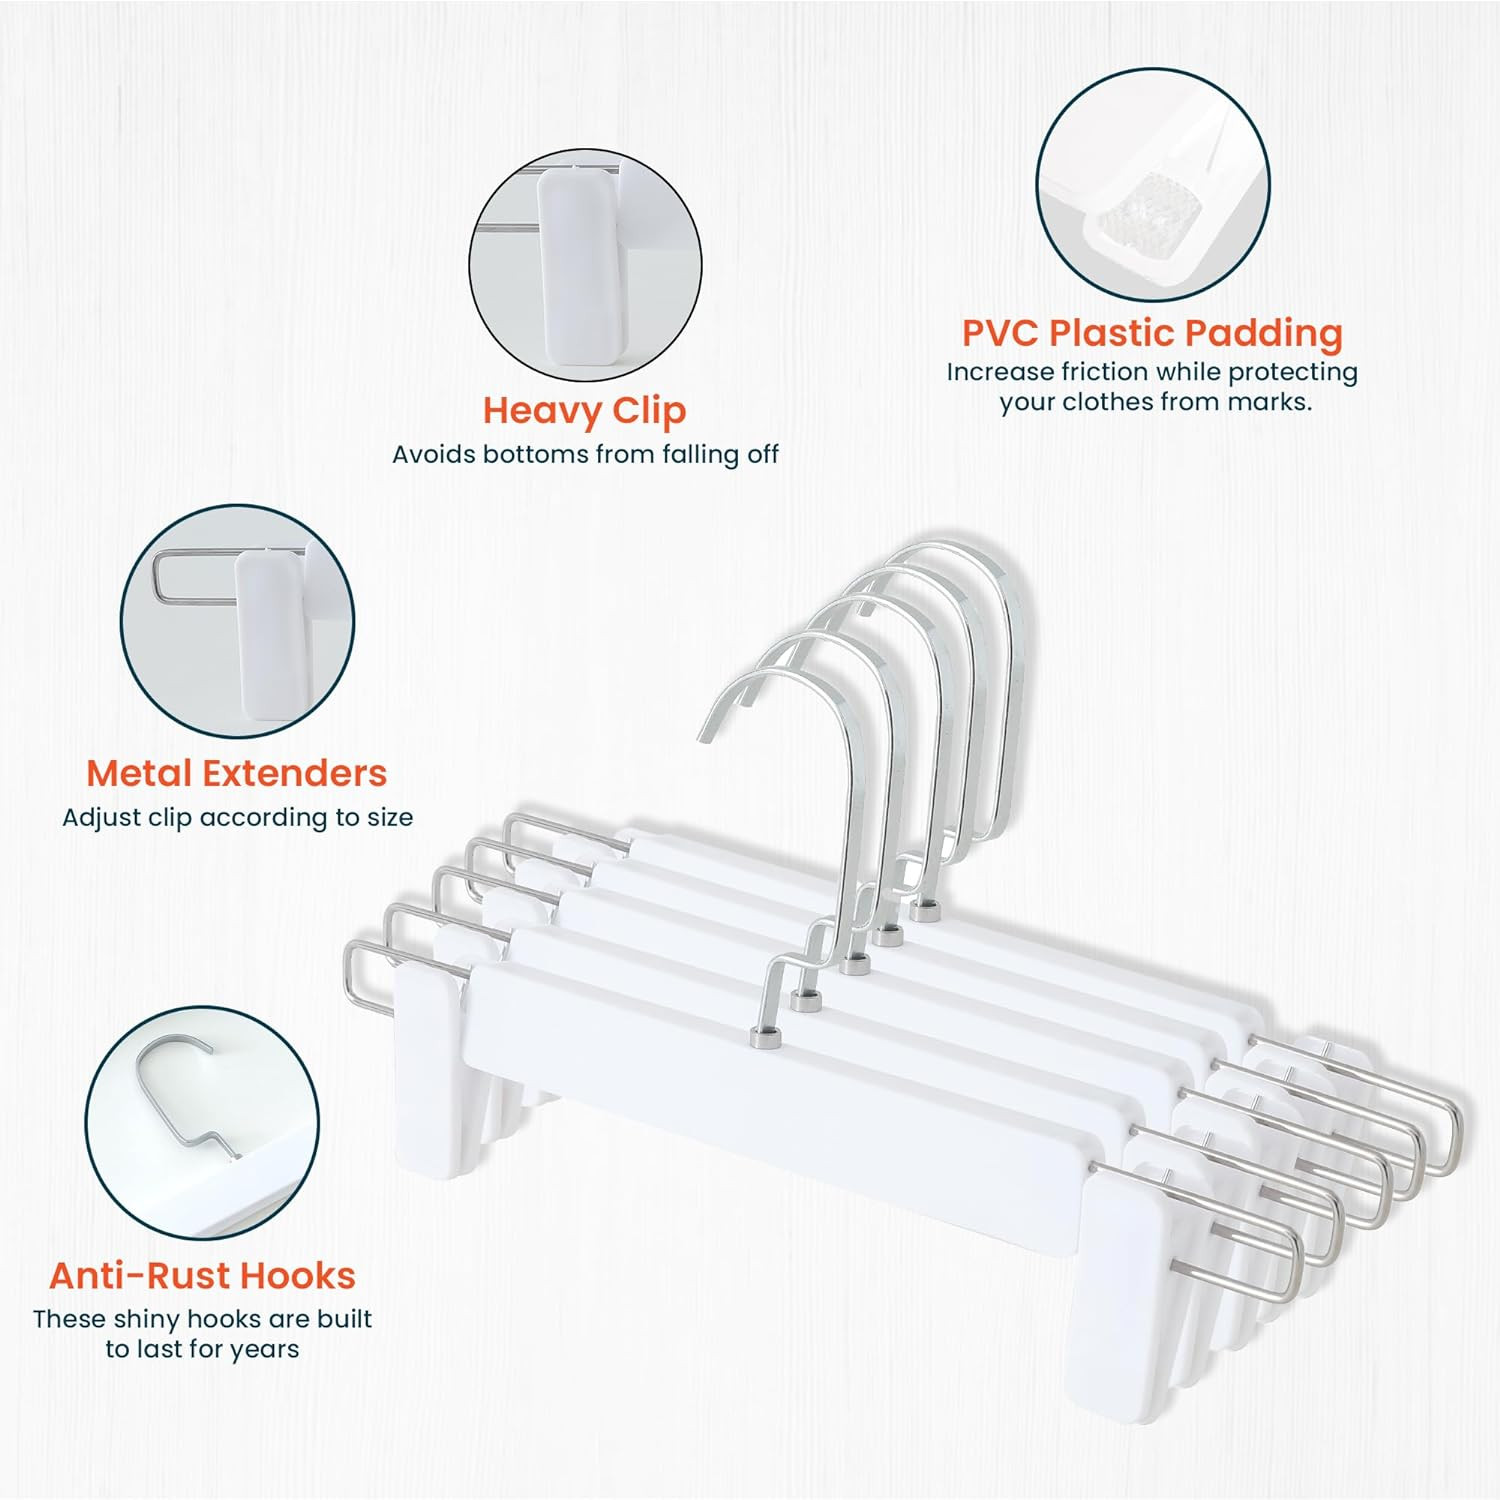 Kuber IndustriesRecycled Plastic Cloth Hanger Set of 5 With Chromed Plated Steel Hook (White)